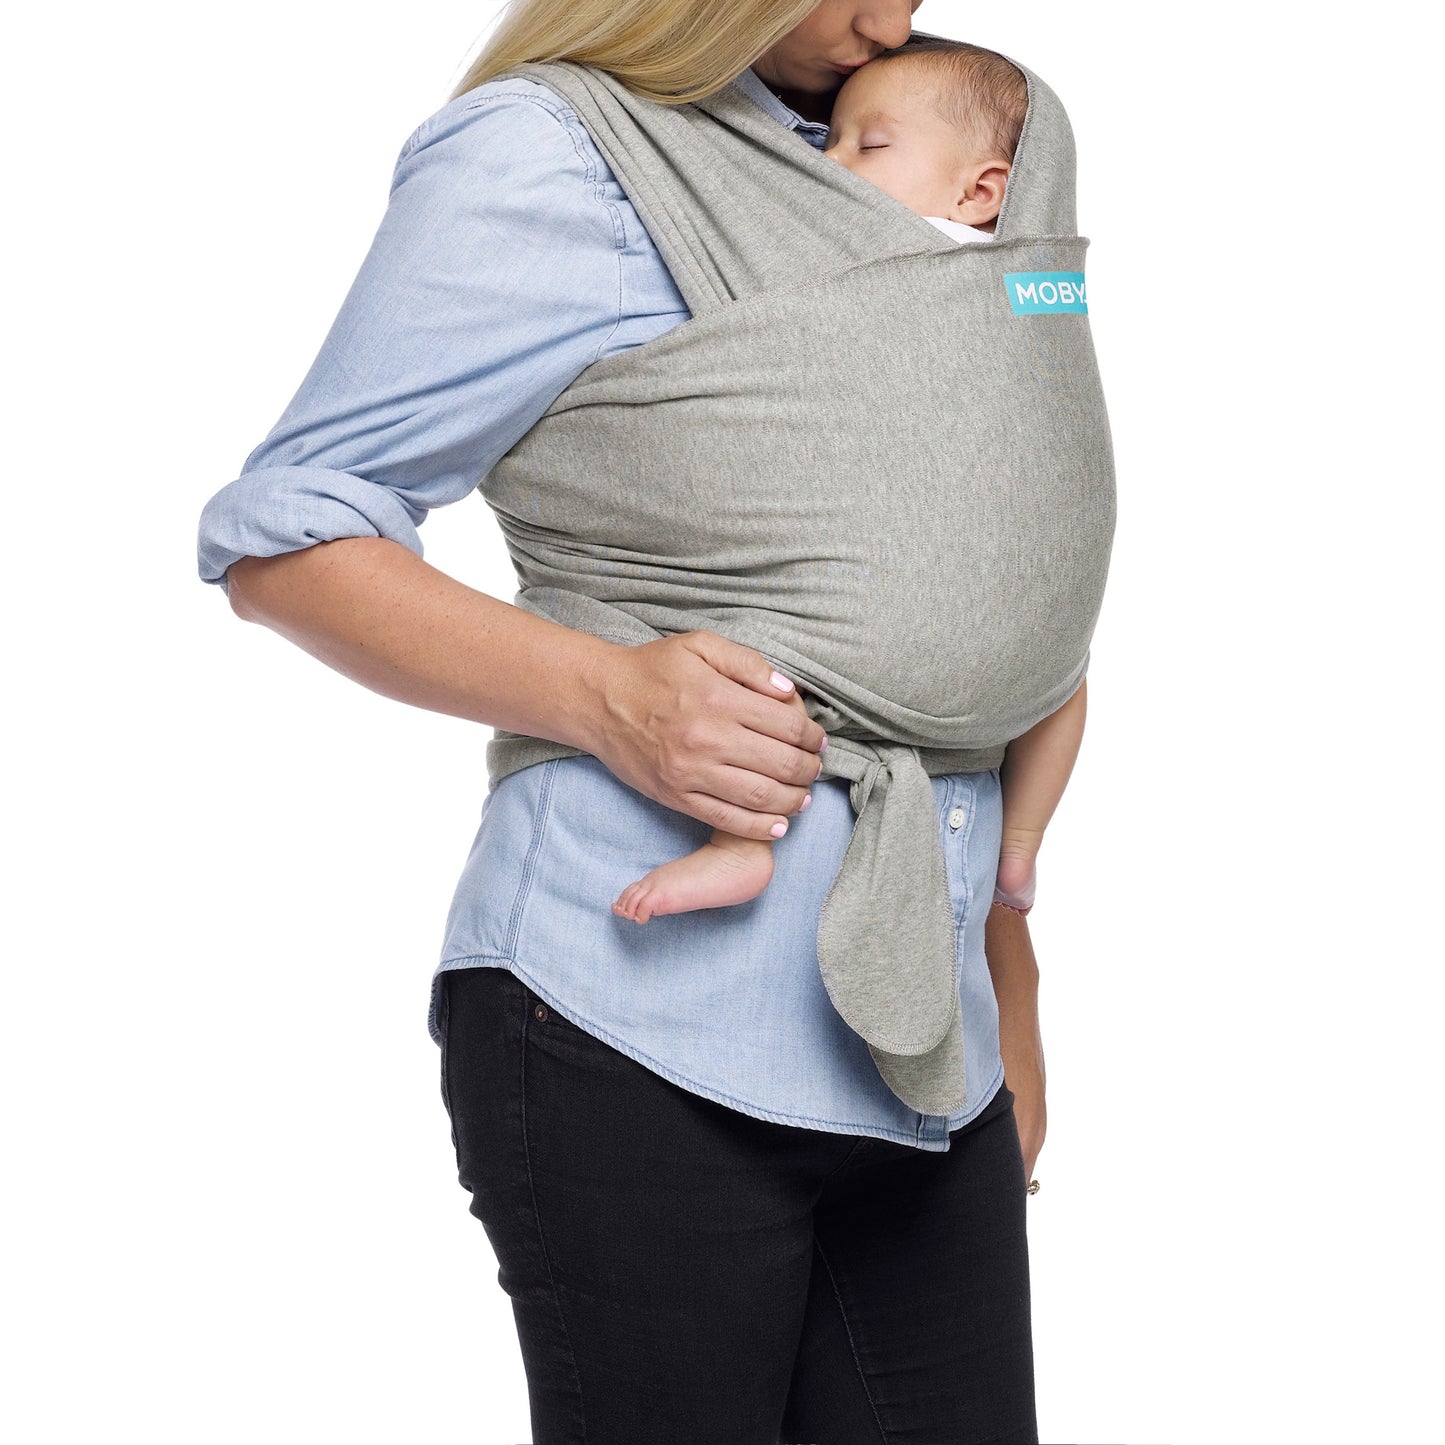 Moby Wrap Baby Carrier, Light Grey